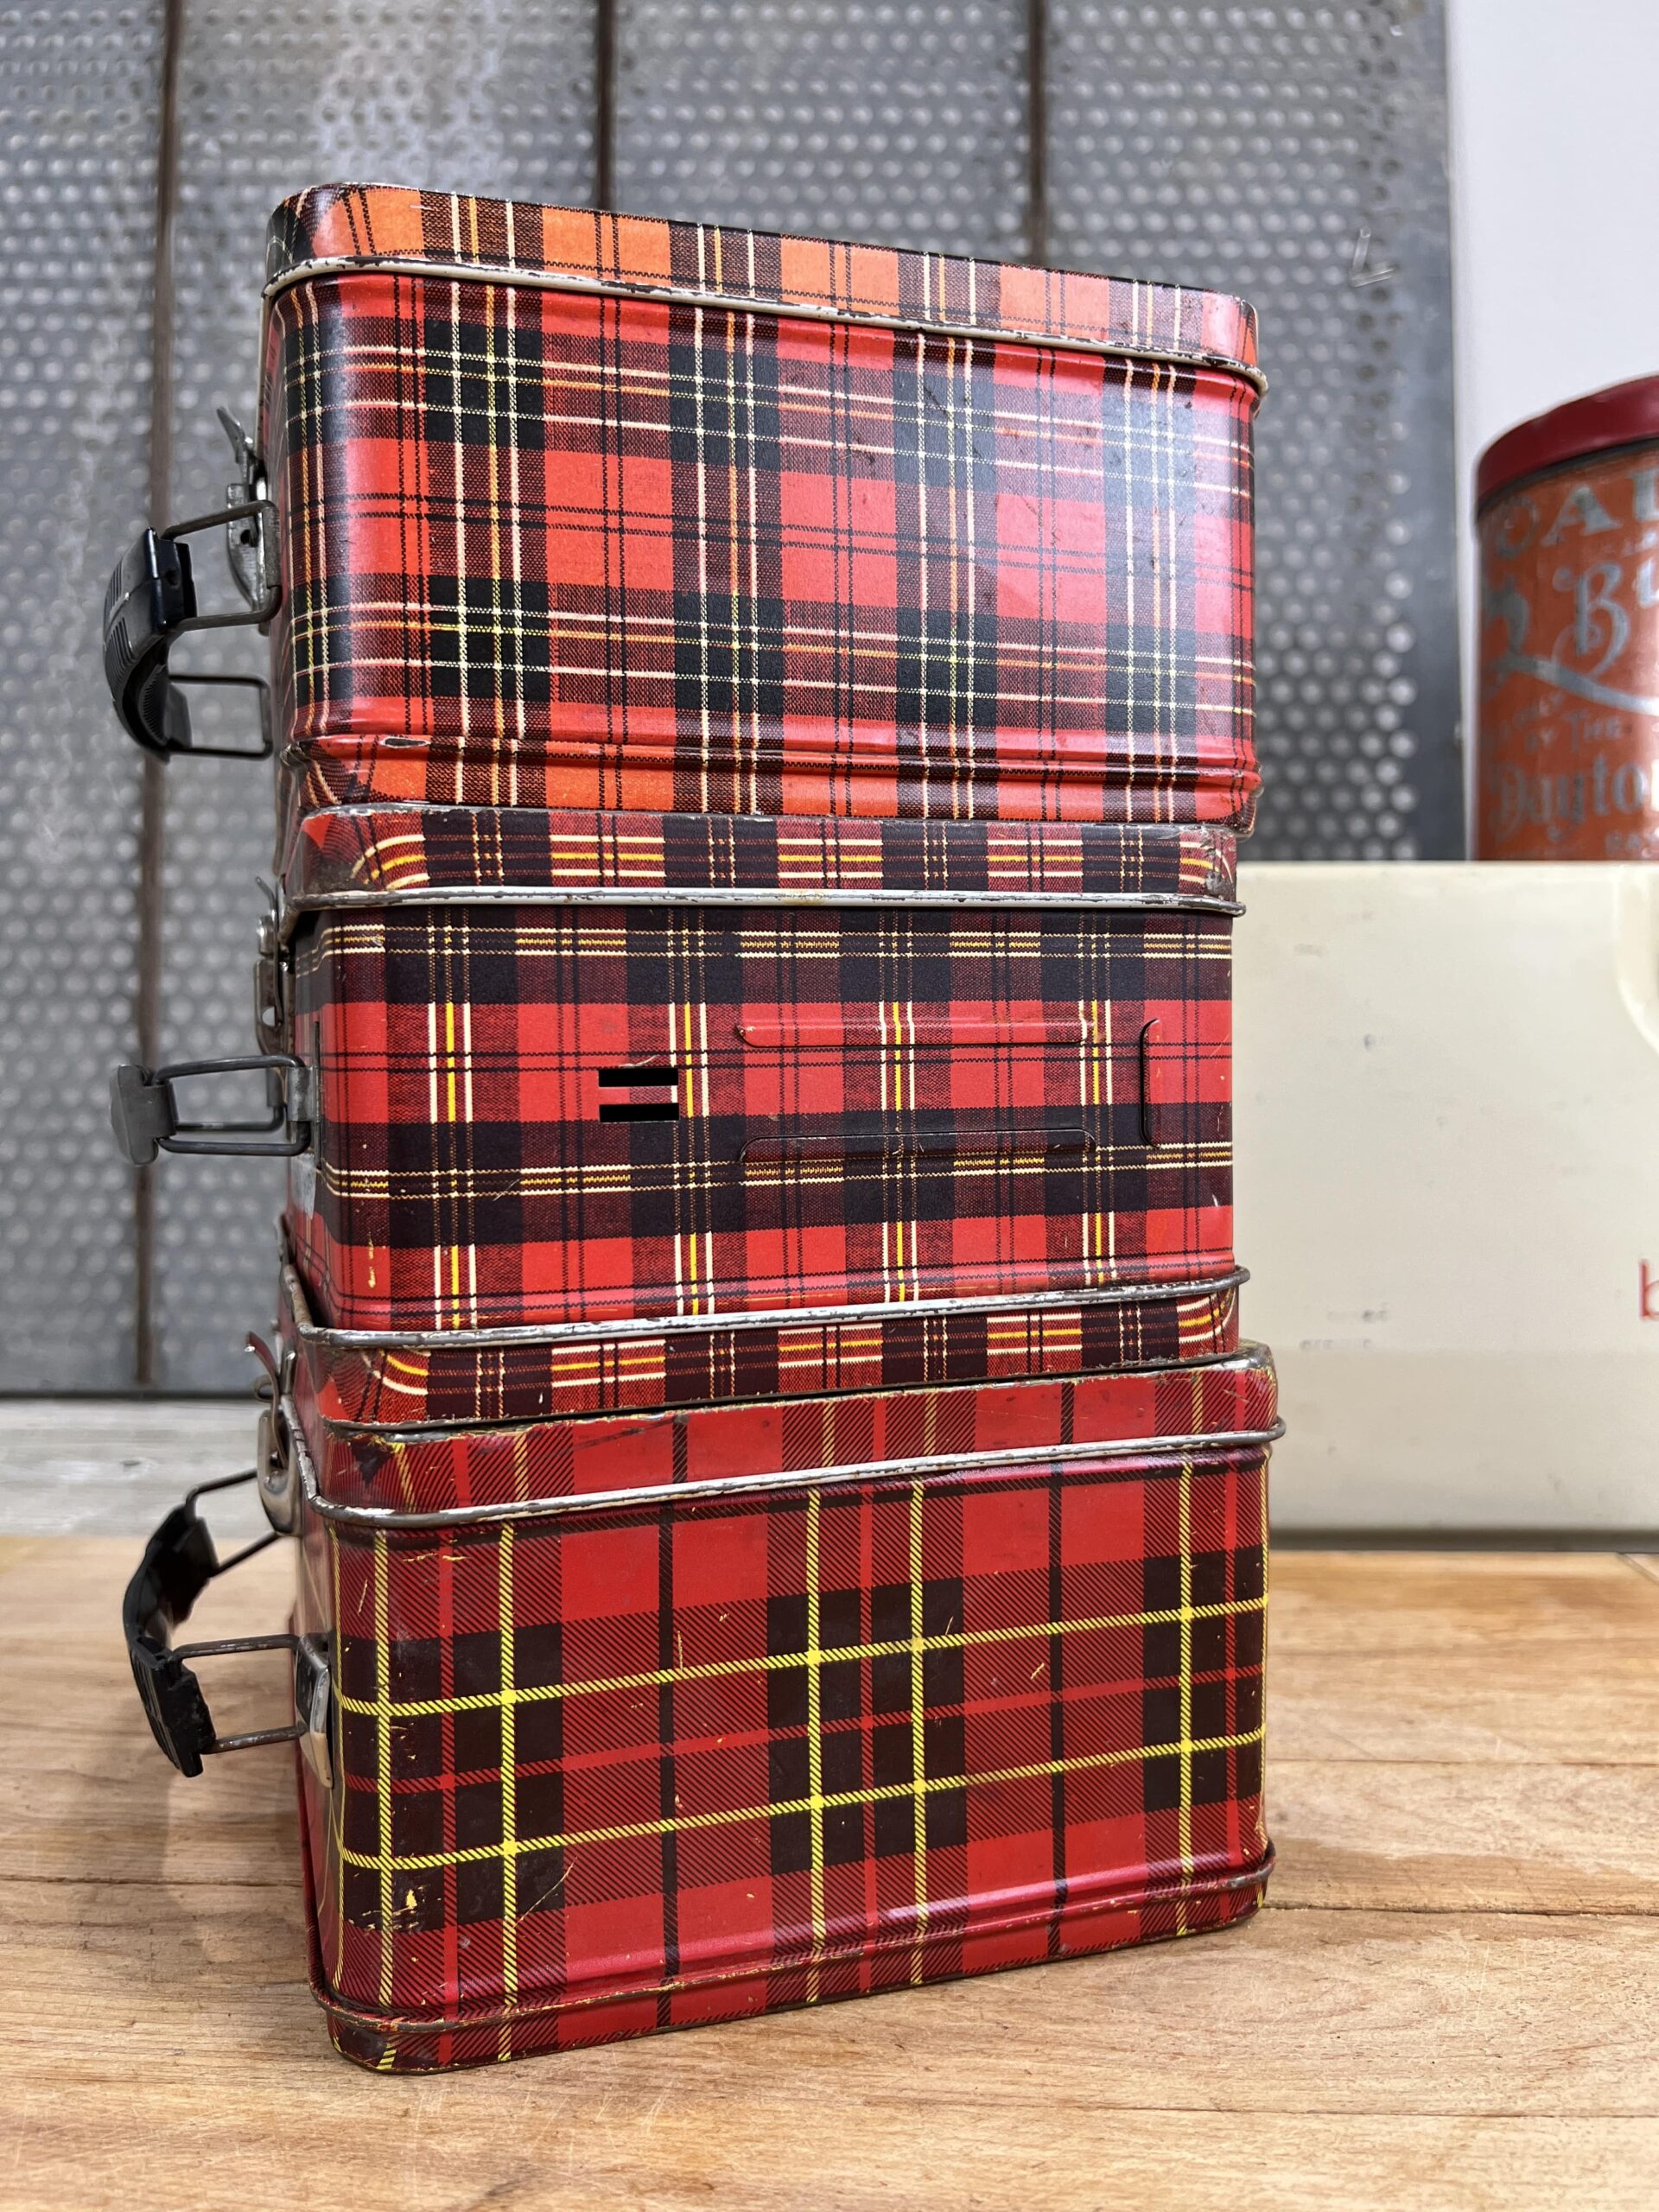 https://thejunkparlor.com/wp-content/uploads/2023/06/vintage-tartan-plaid-lunch-box-2-min-scaled.jpg